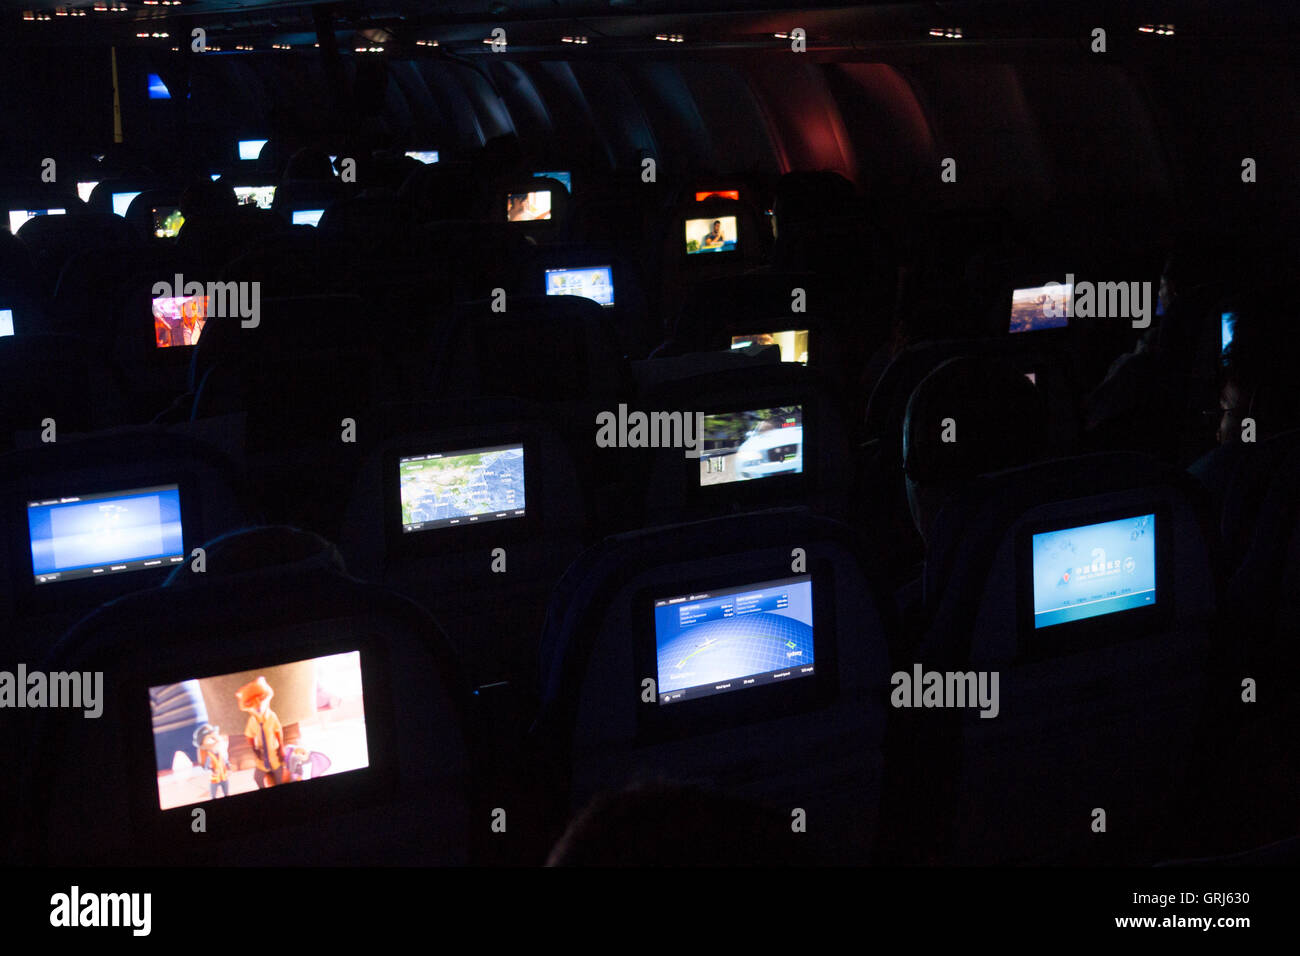 Interior of aircraft cabin with lights dimmed during overnight night flight with personal TV screens on backs of seats Stock Photo